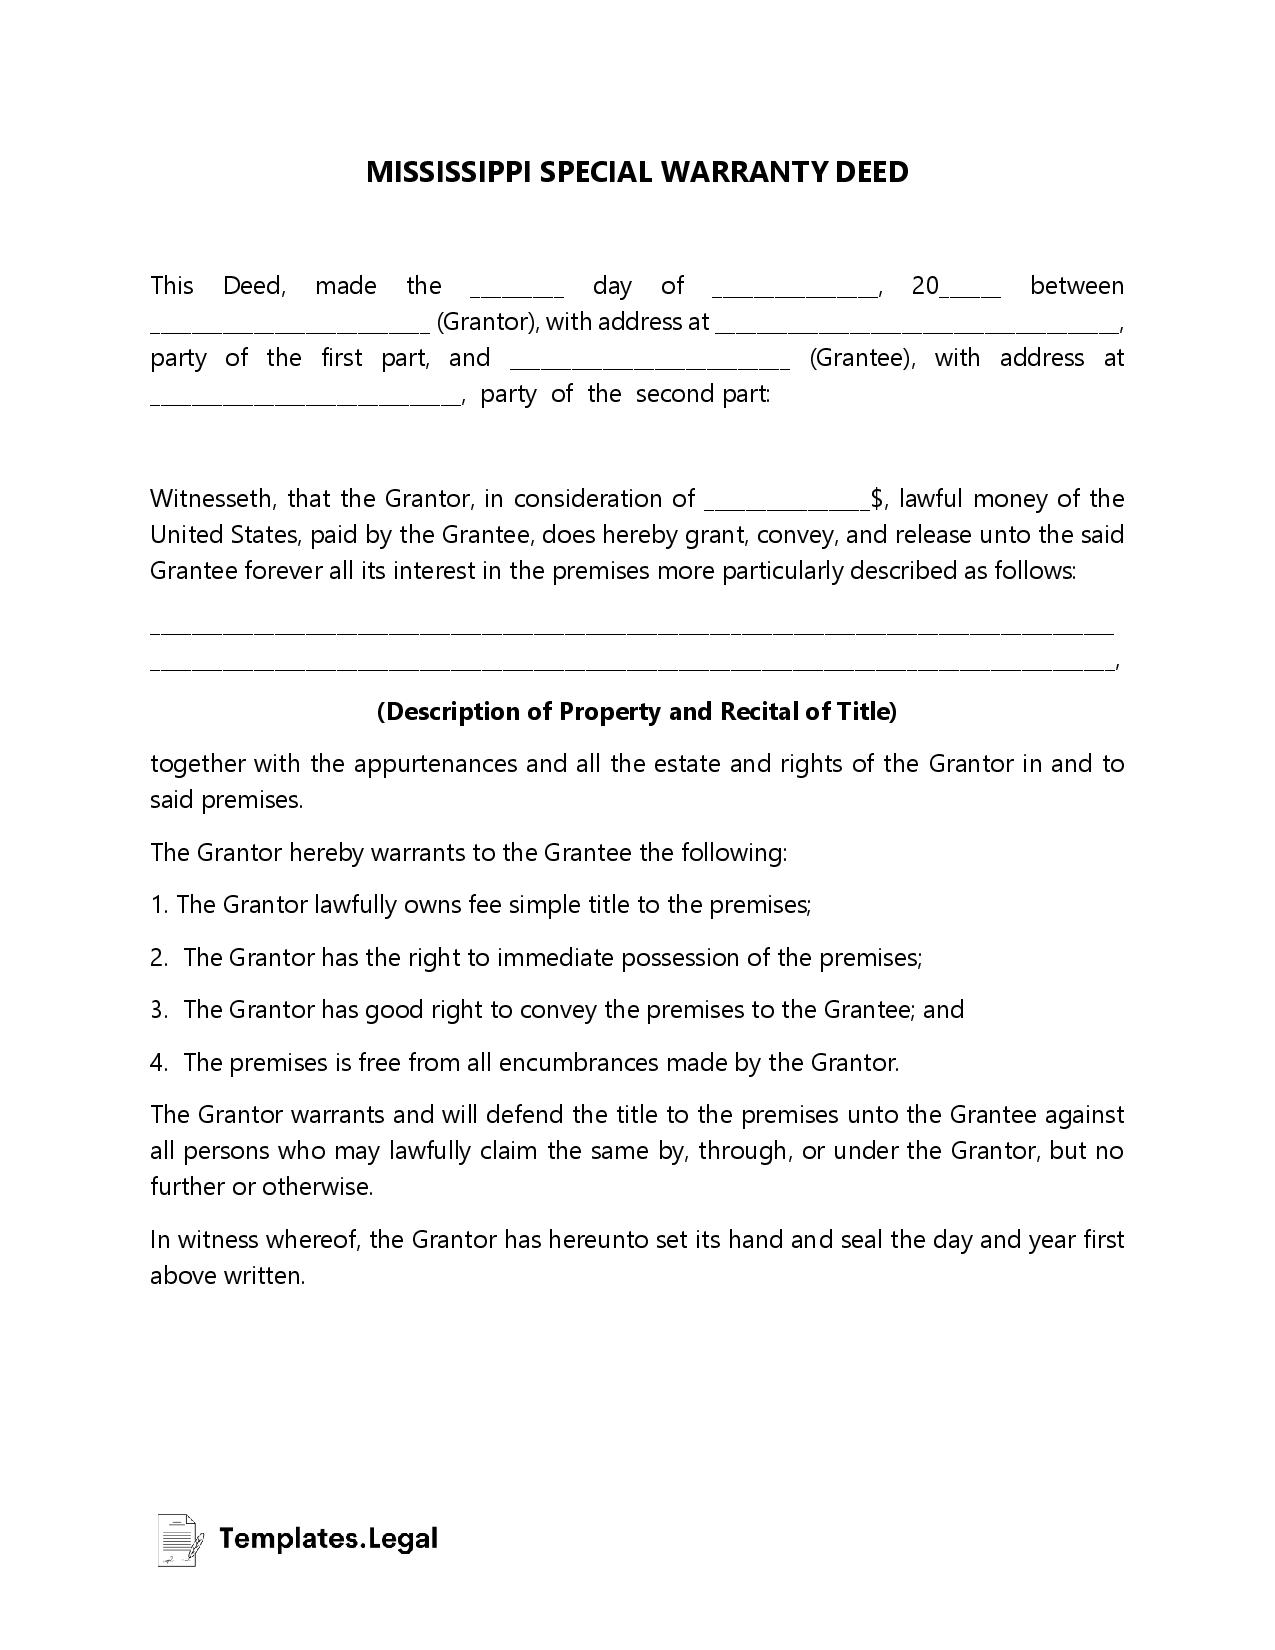 Mississippi Special Warranty Deed - Templates.Legal